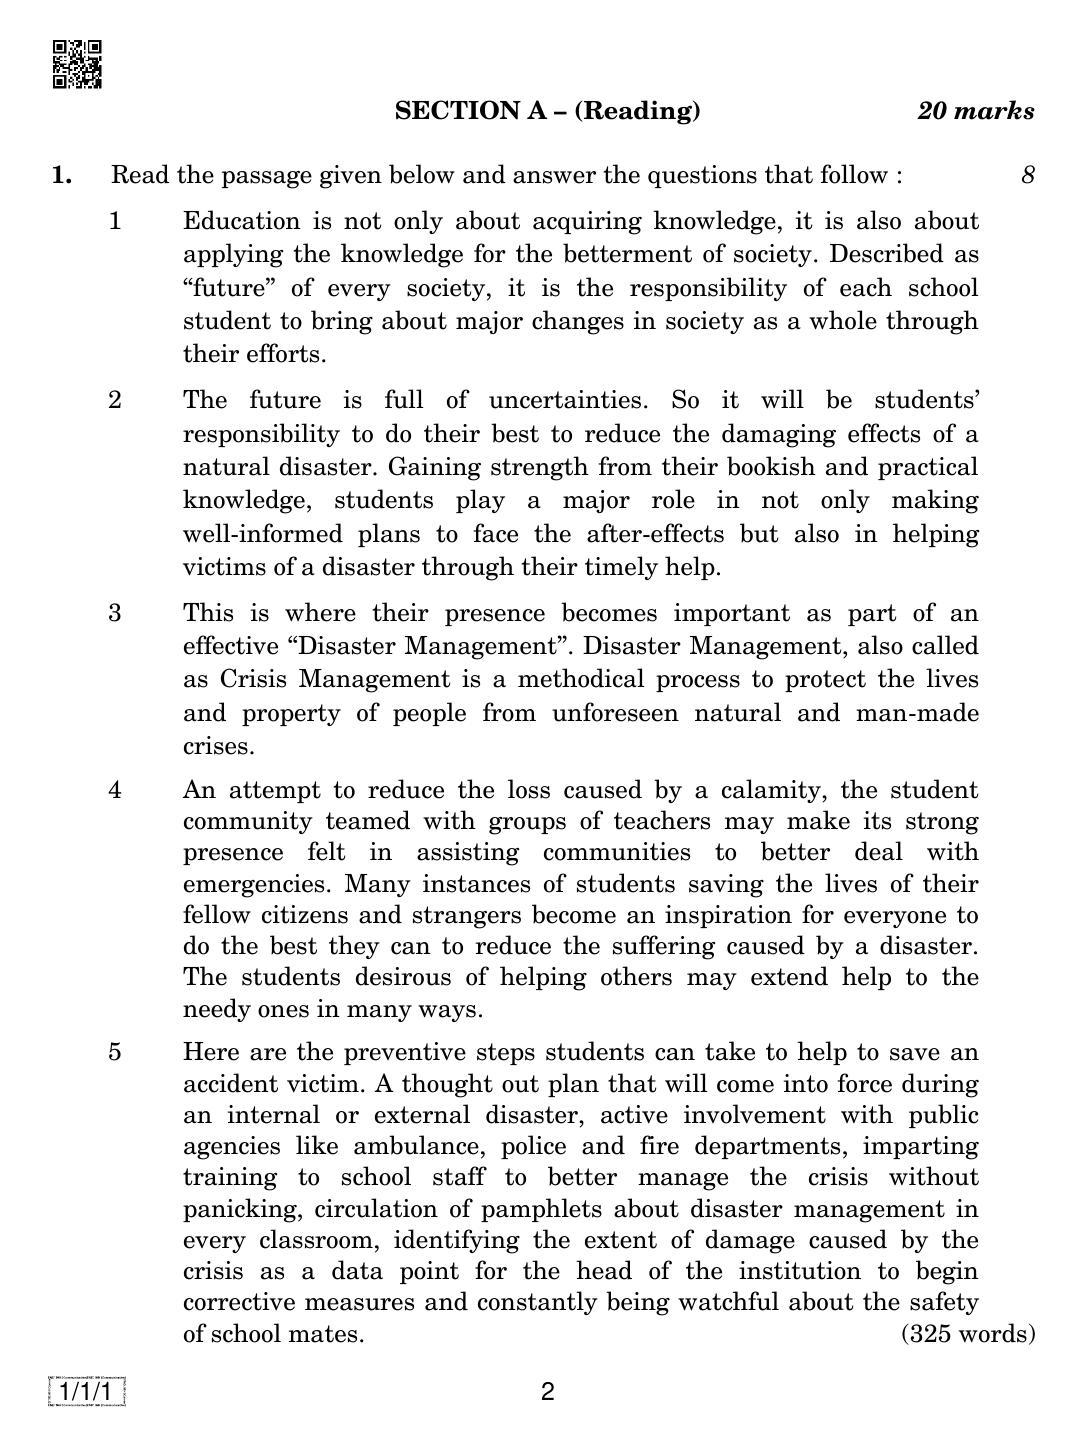 CBSE Class 10 1-1-1 ENGLISH COMM. 2019 Compartment Question Paper - Page 2